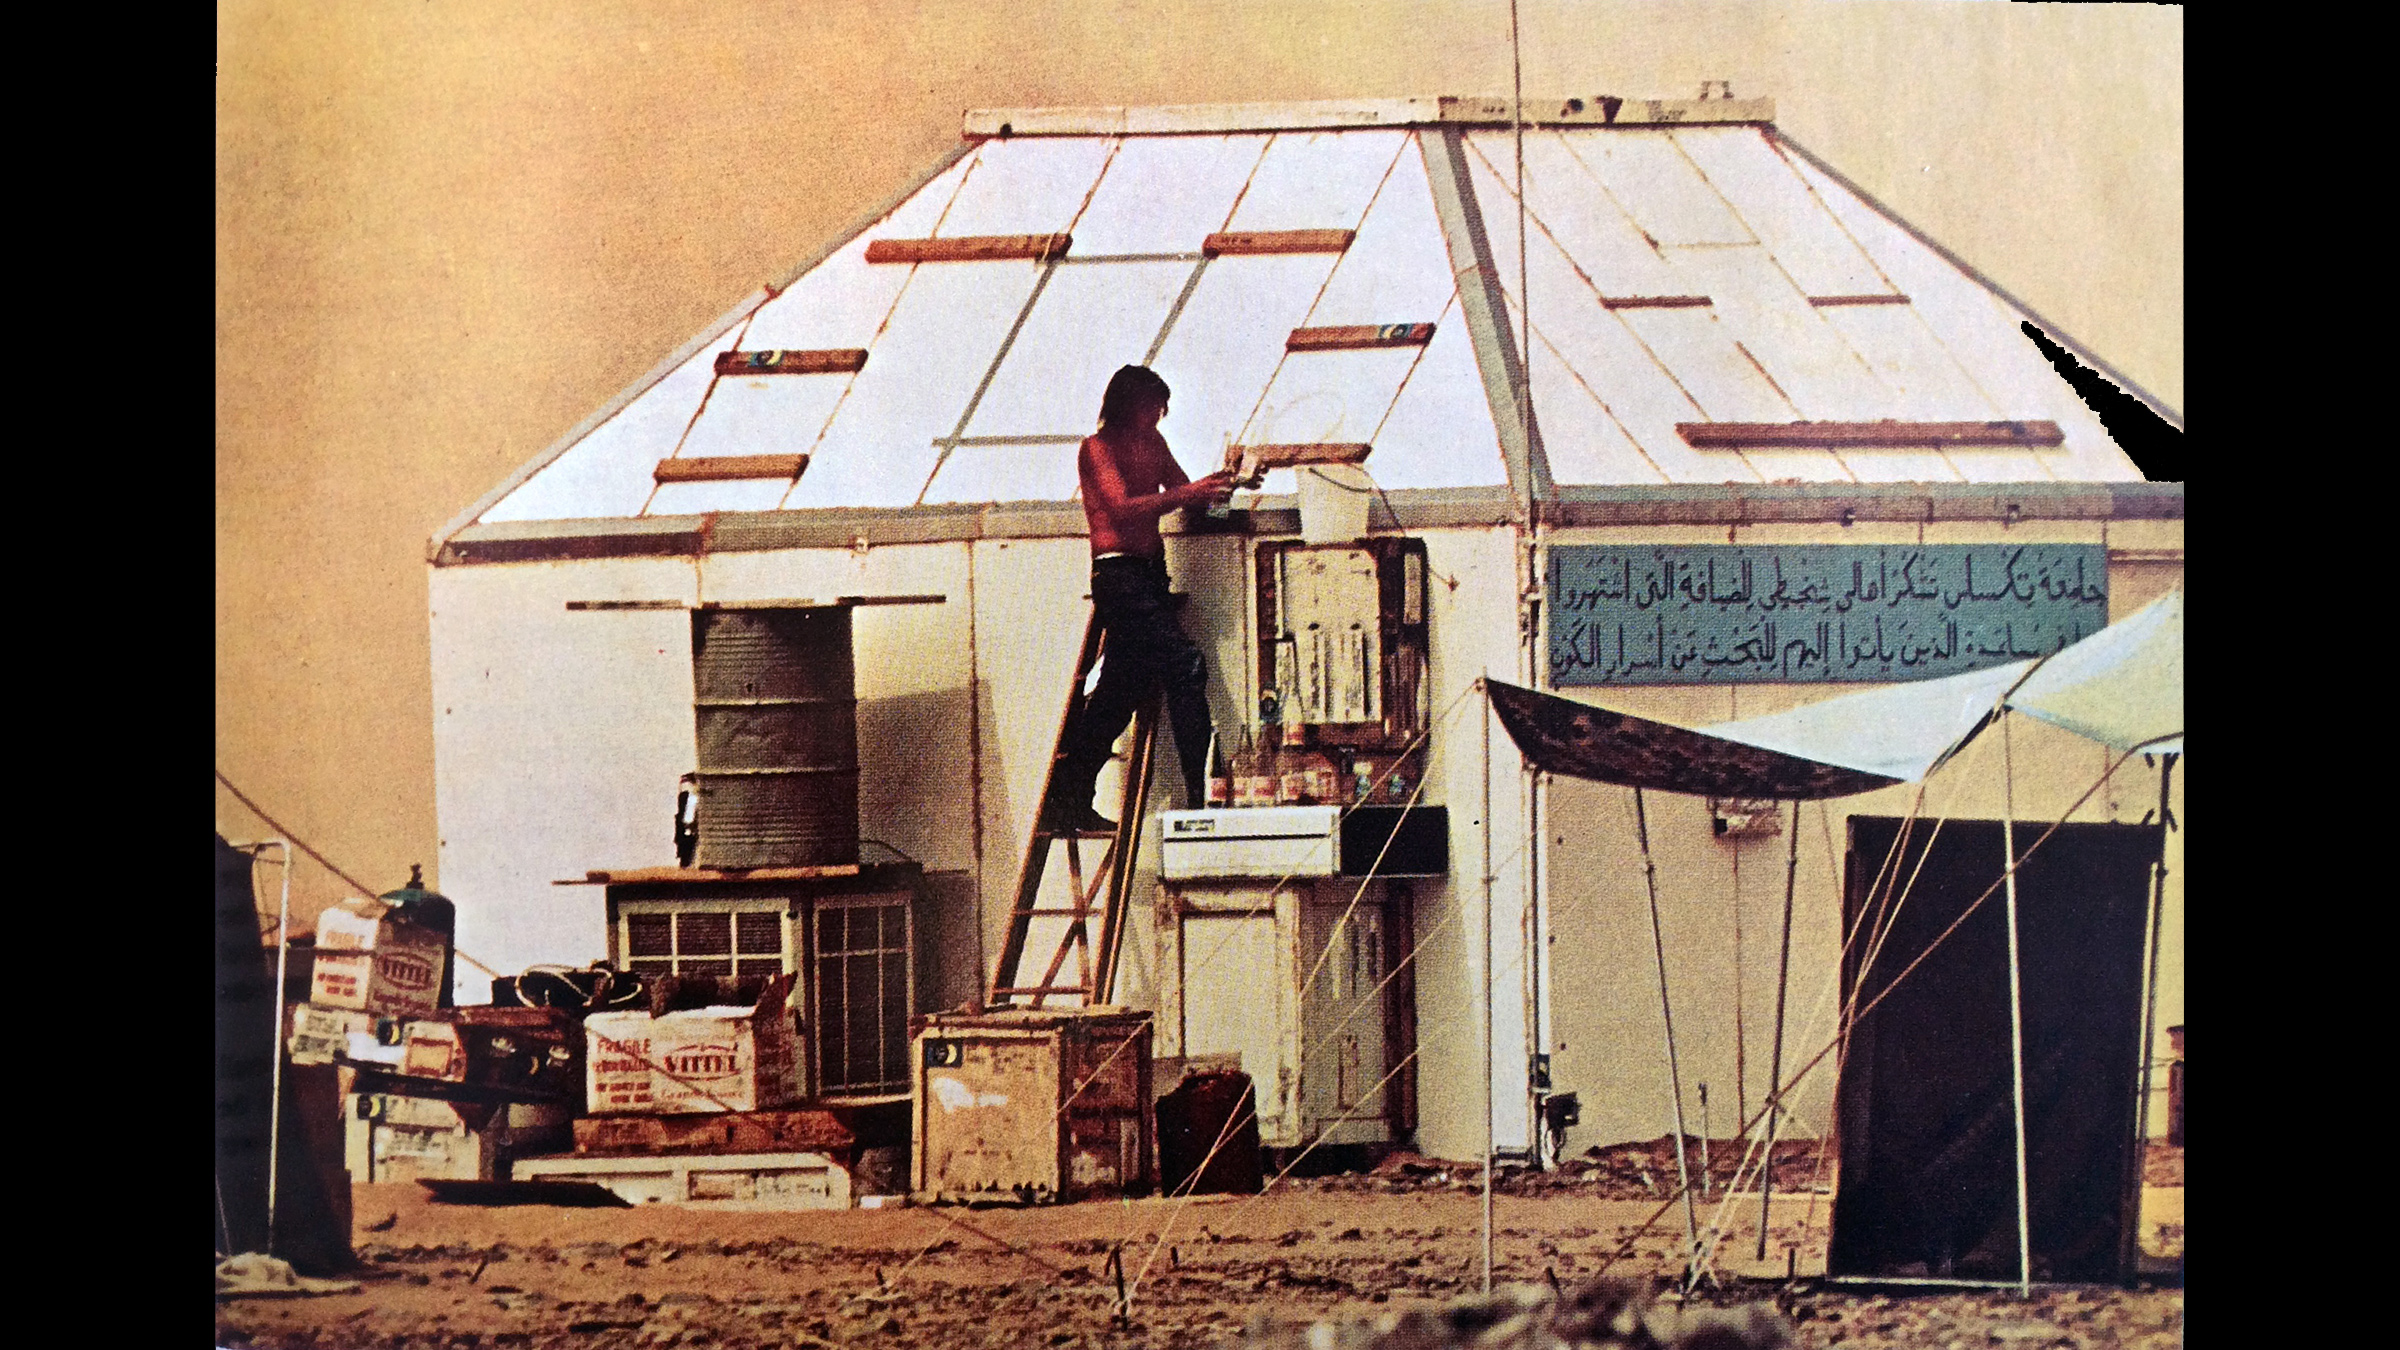 A man stands on a ladder outside a white hut in the desert